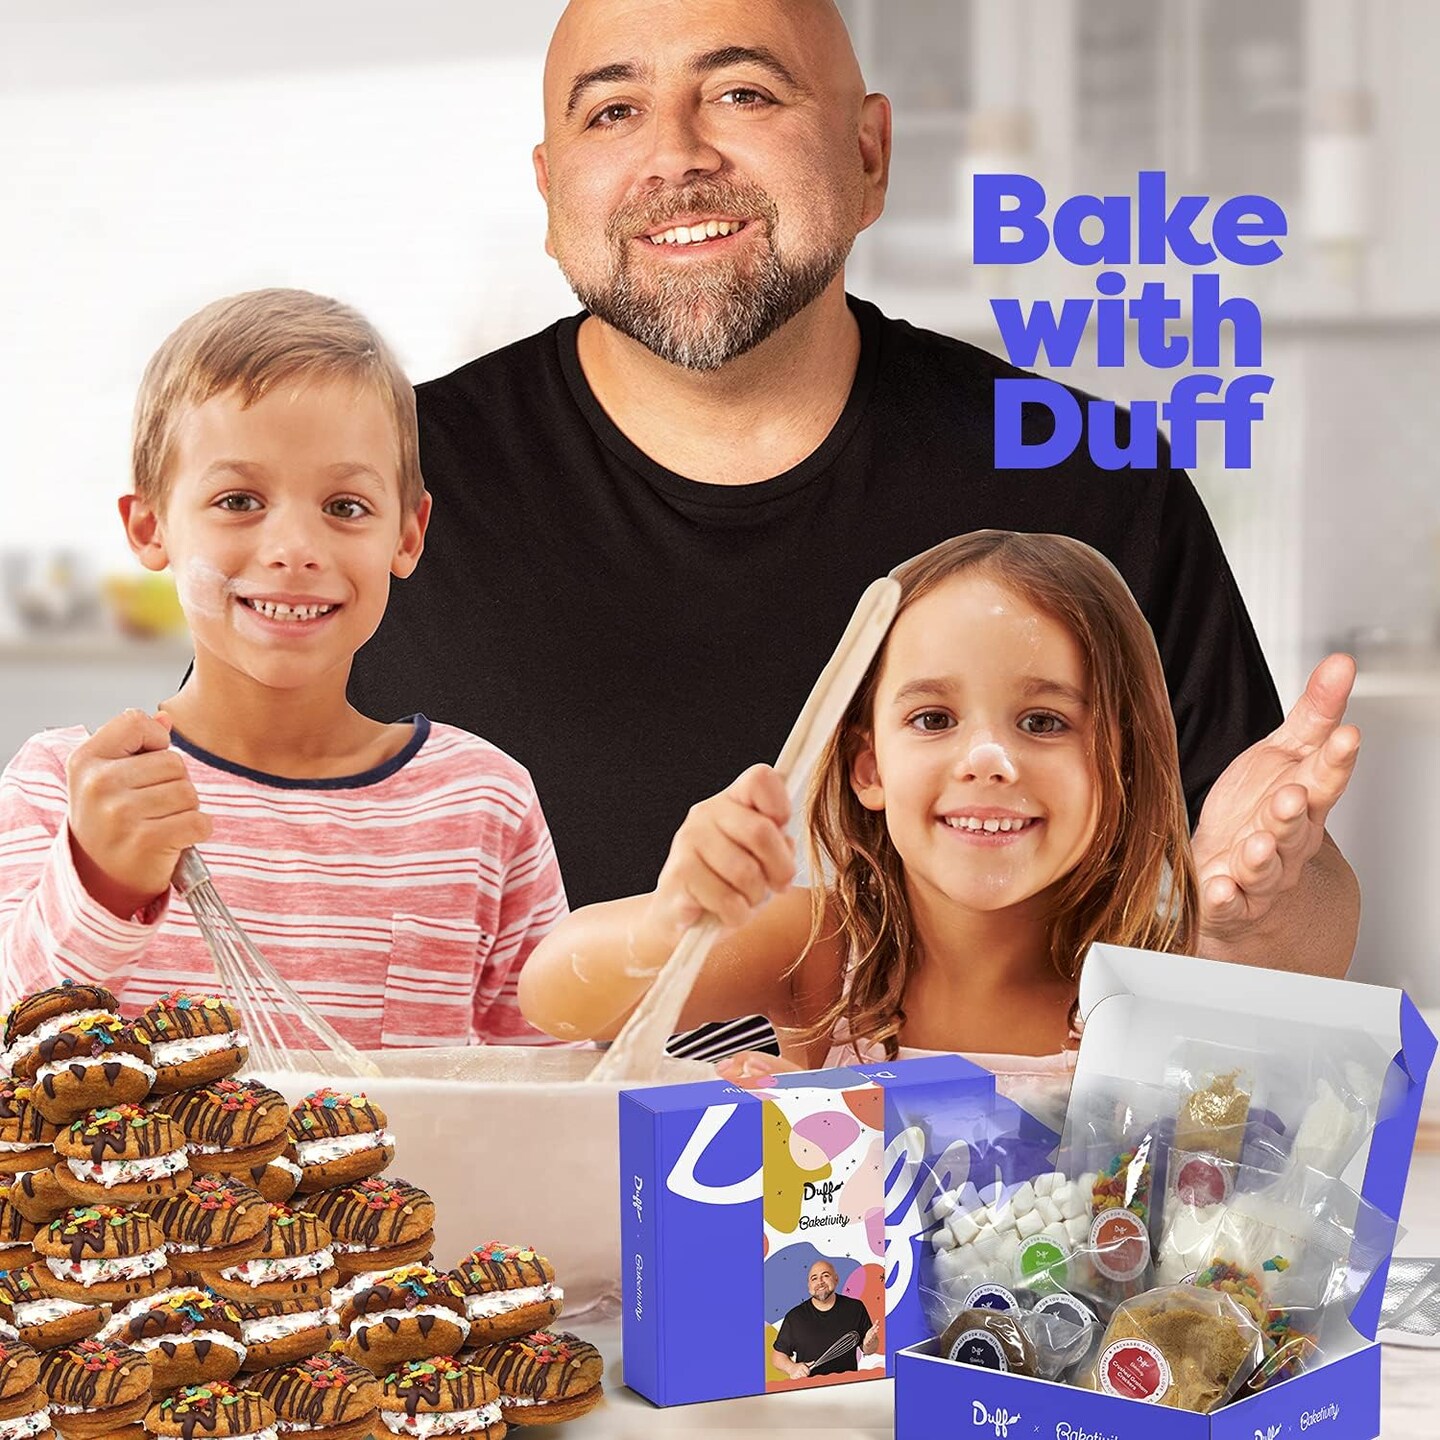 Duff Goldman DIY Baking Set for Kids by Baketivity - Bake Delicious S&#x2019;mores Sandwich Cookies with Premeasured Ingredients | Best Family Fun Activity, Great Gift for Girls, Boys, Teens, and Adults